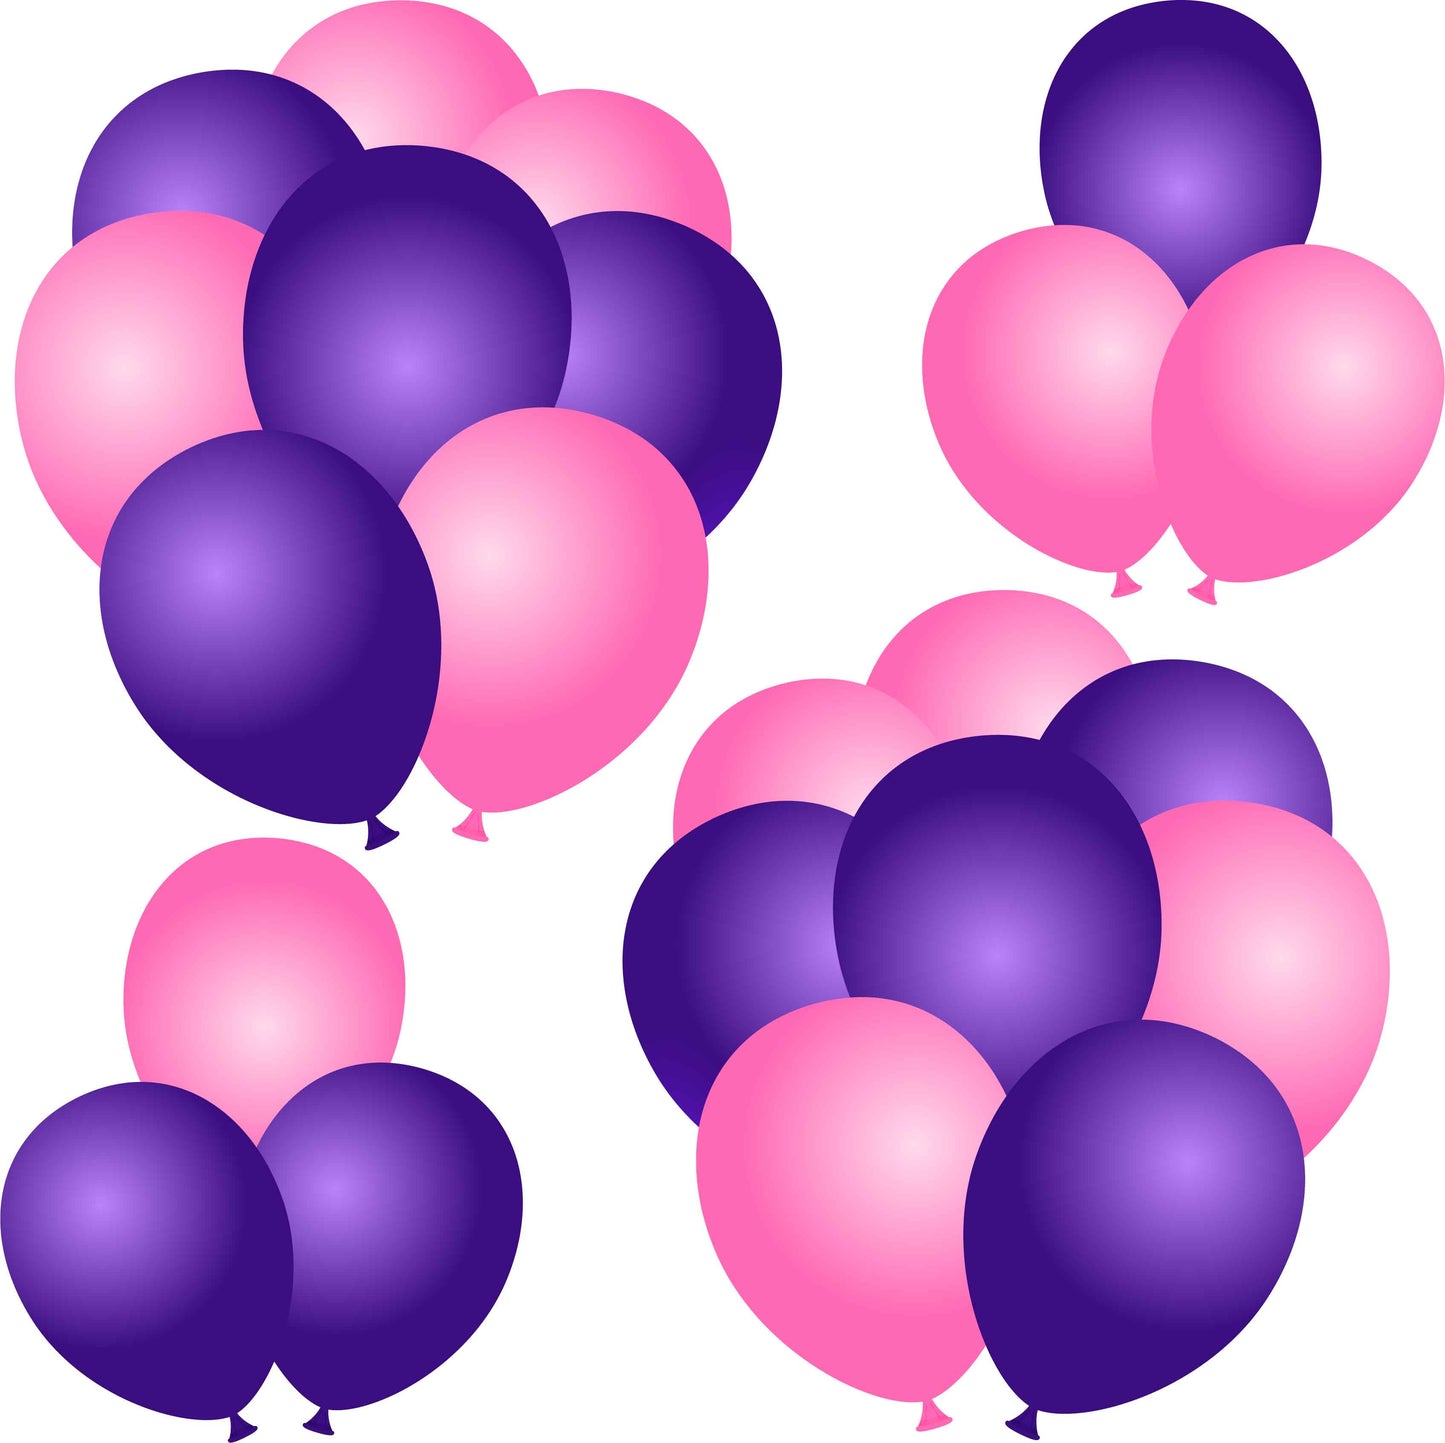 Solid Pink and Purple Balloons Half Sheet Misc.